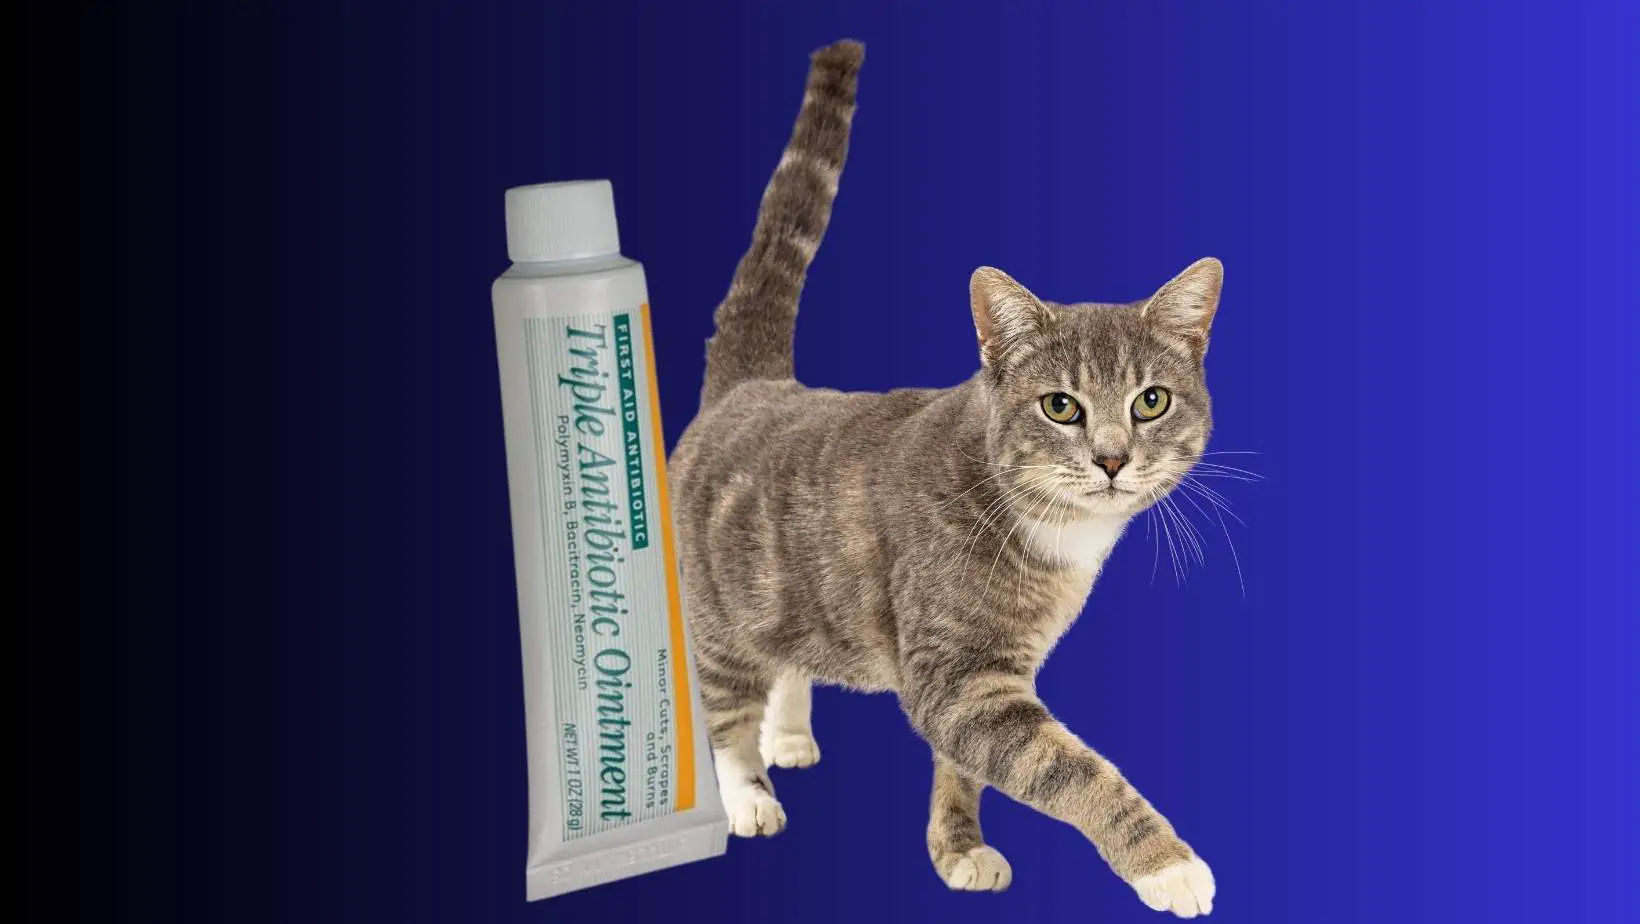 Is Triple Antibiotic Ointment Safe for Cats?